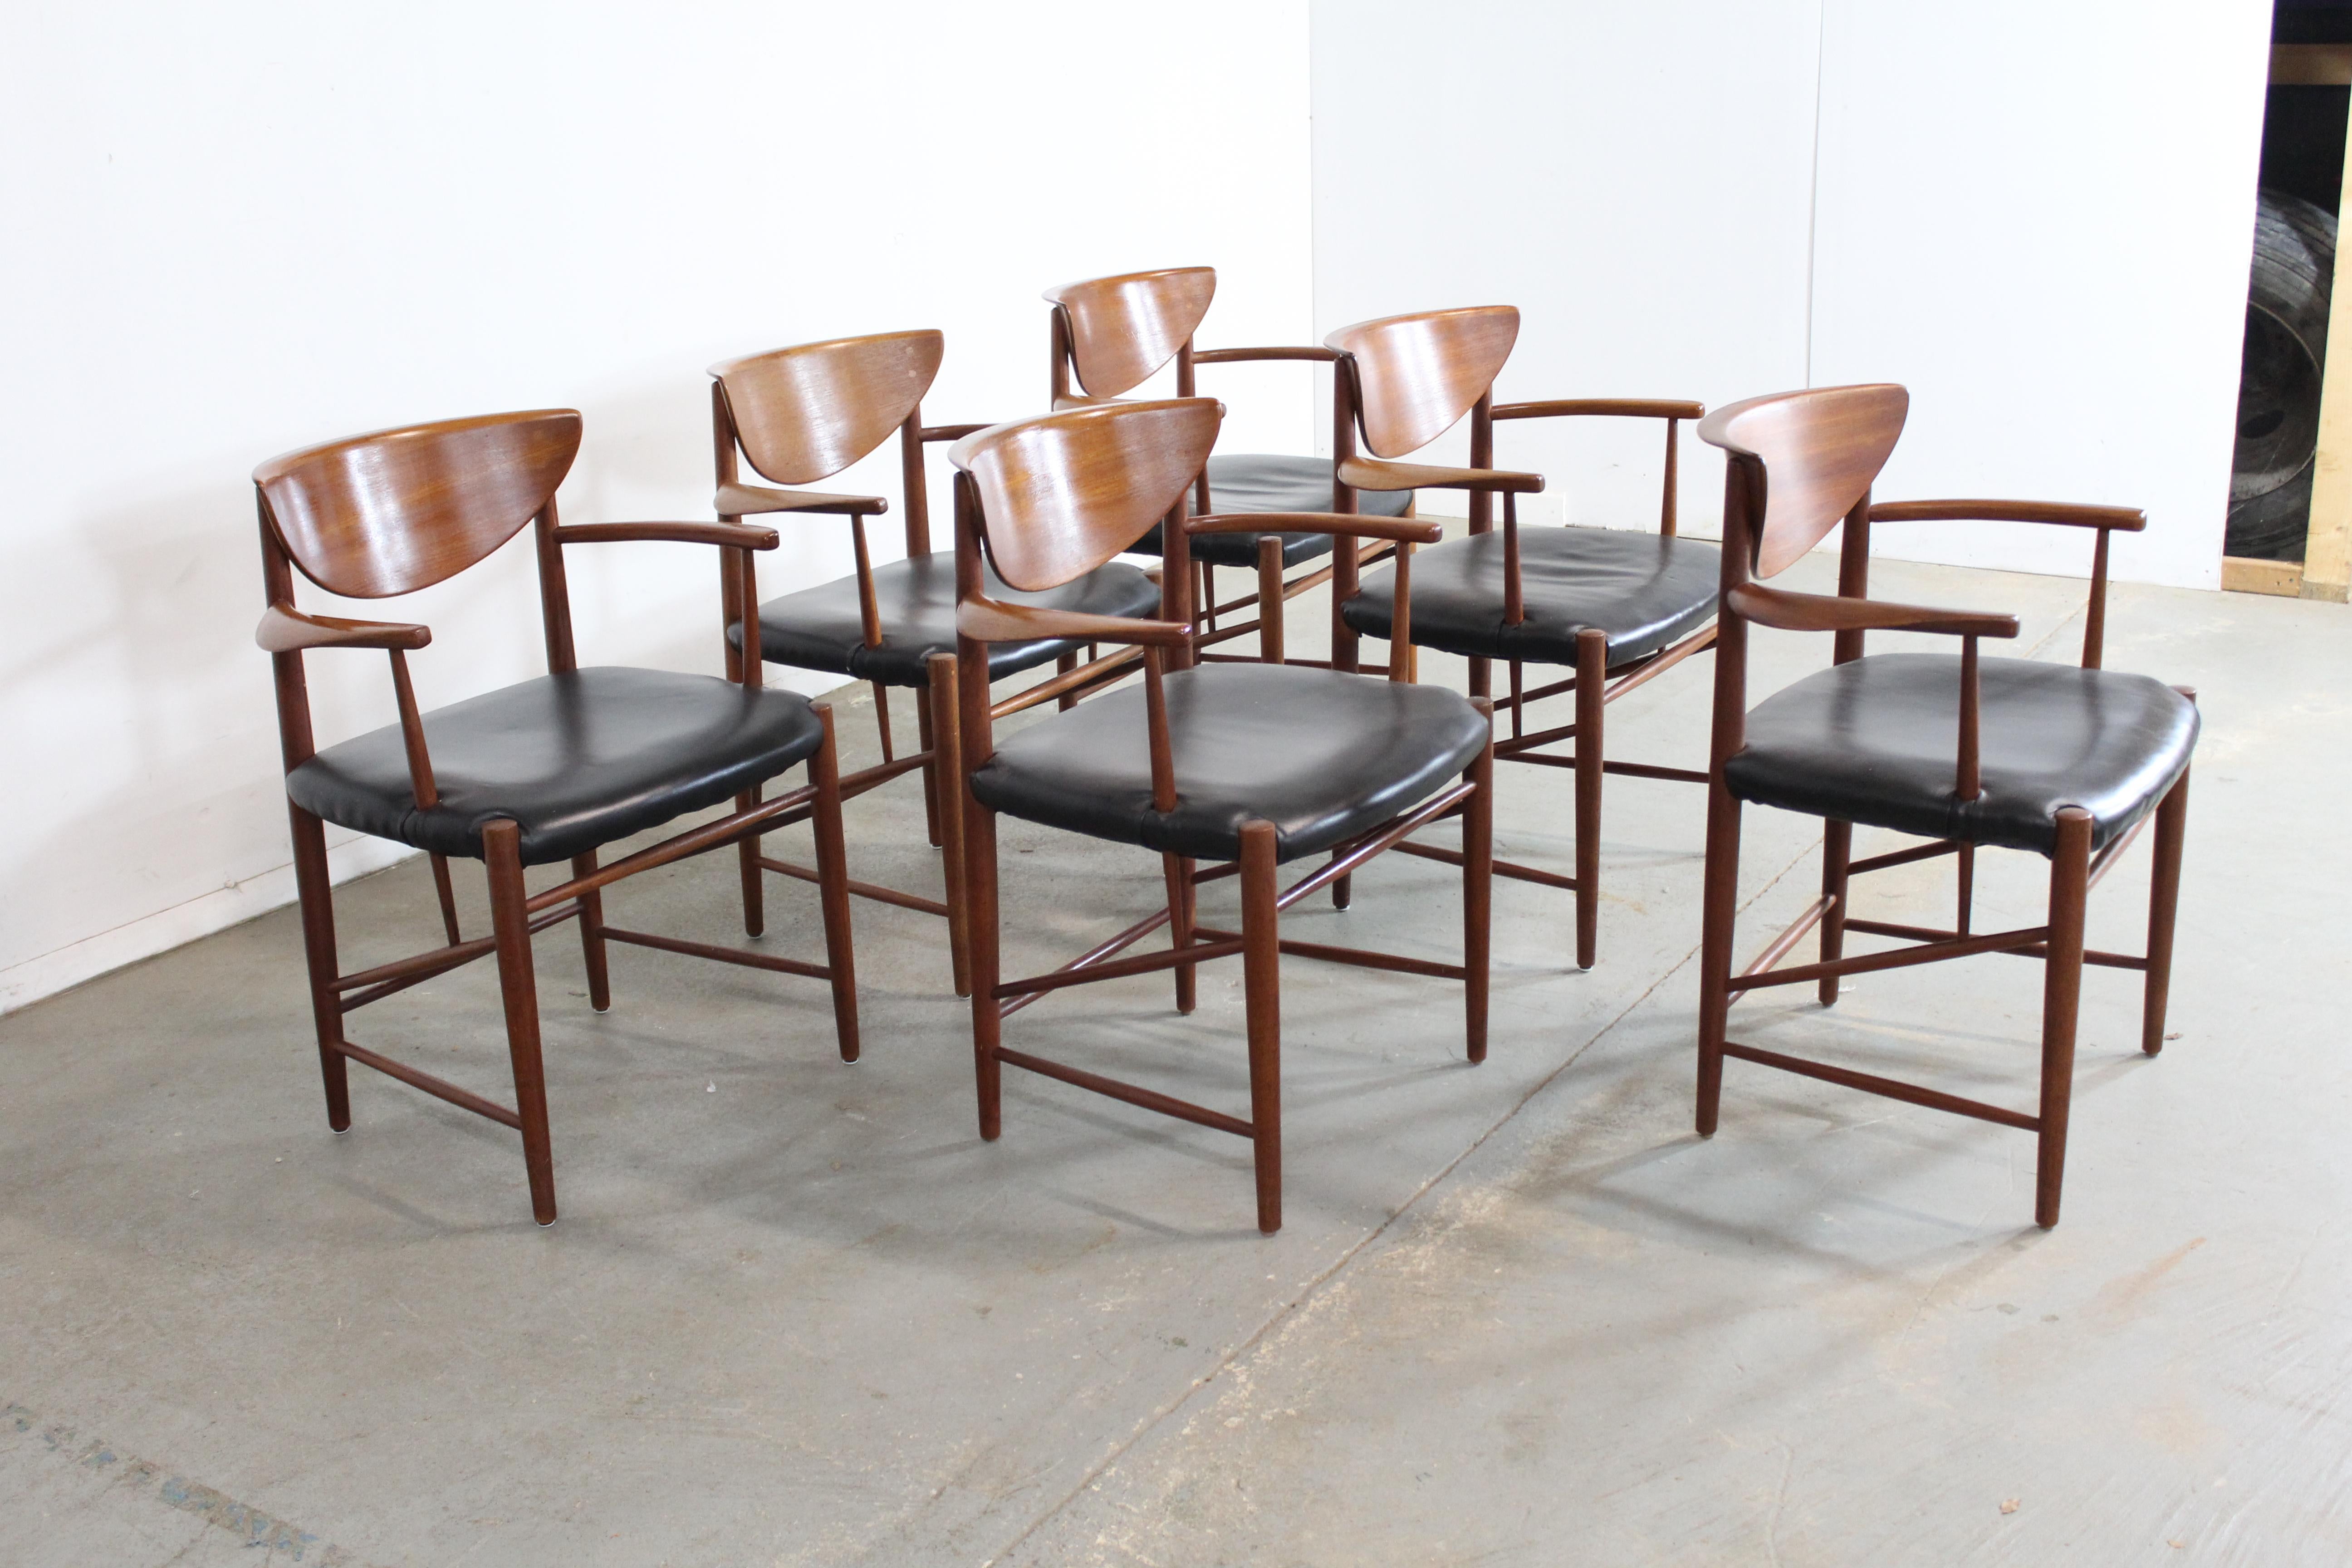 Set of 6 Mid-Century Modern Danish Modern Peter Hvidt teak dining chairs.

Offered is a set of 6 Danish Modern teak dining chairs, designed circa 1953 by Peter Hvidt. These chairs are unique and have unicorn status and being a rare find. This set